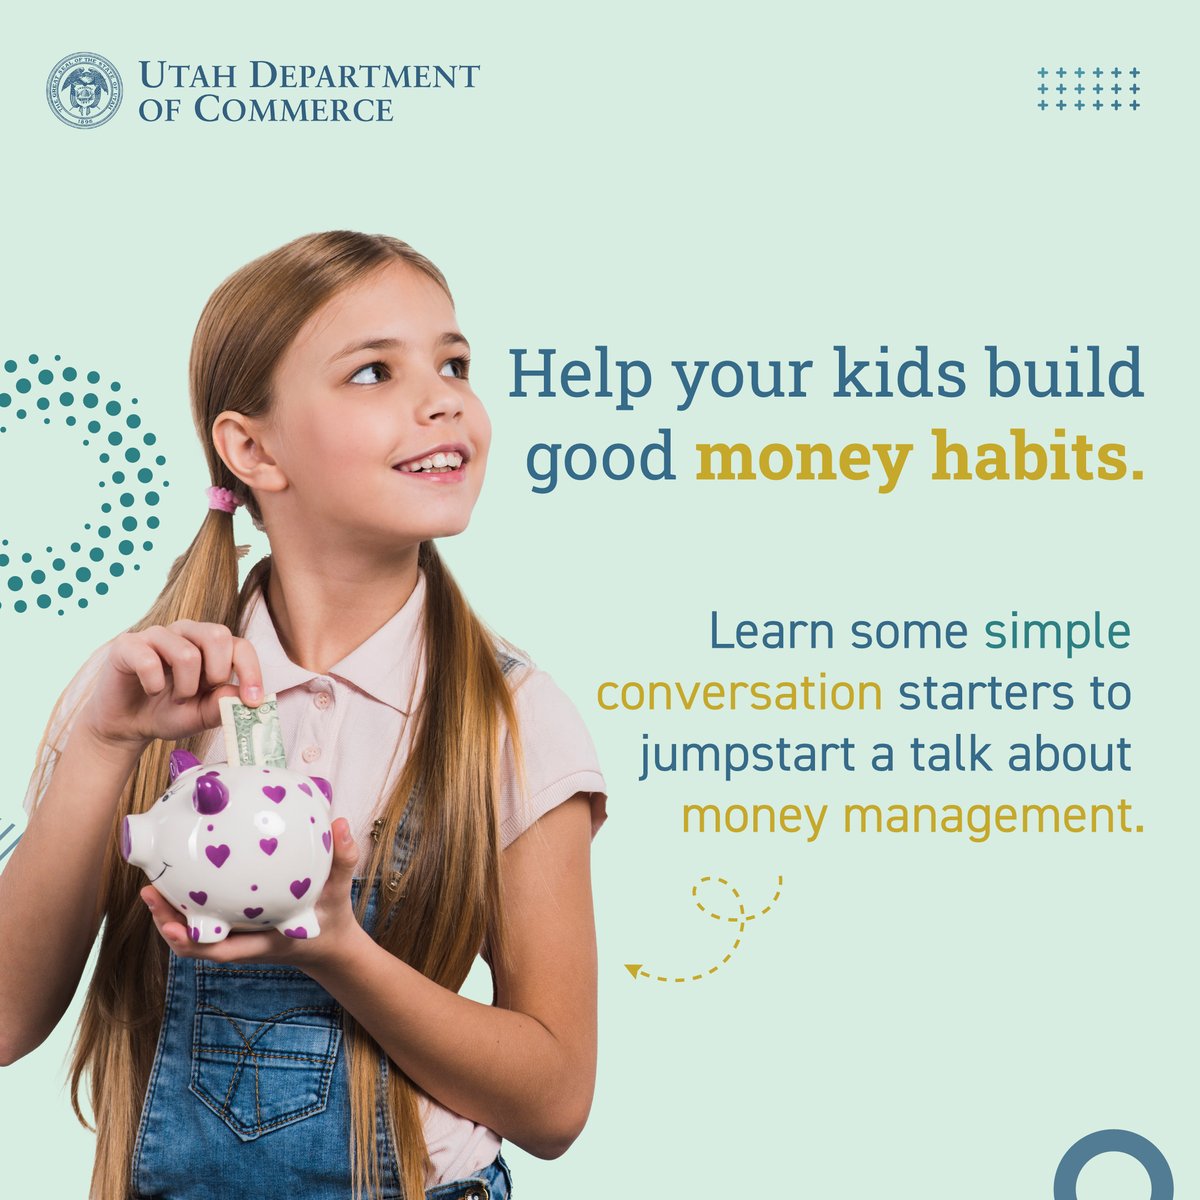 Graduations are quickly approaching. Help your kids build good money habits as they head out into the world by talking to them about finances. Here are some questions you can ask them to jumpstart a conversation about responsible money management: nasaa.org/conversation-s…